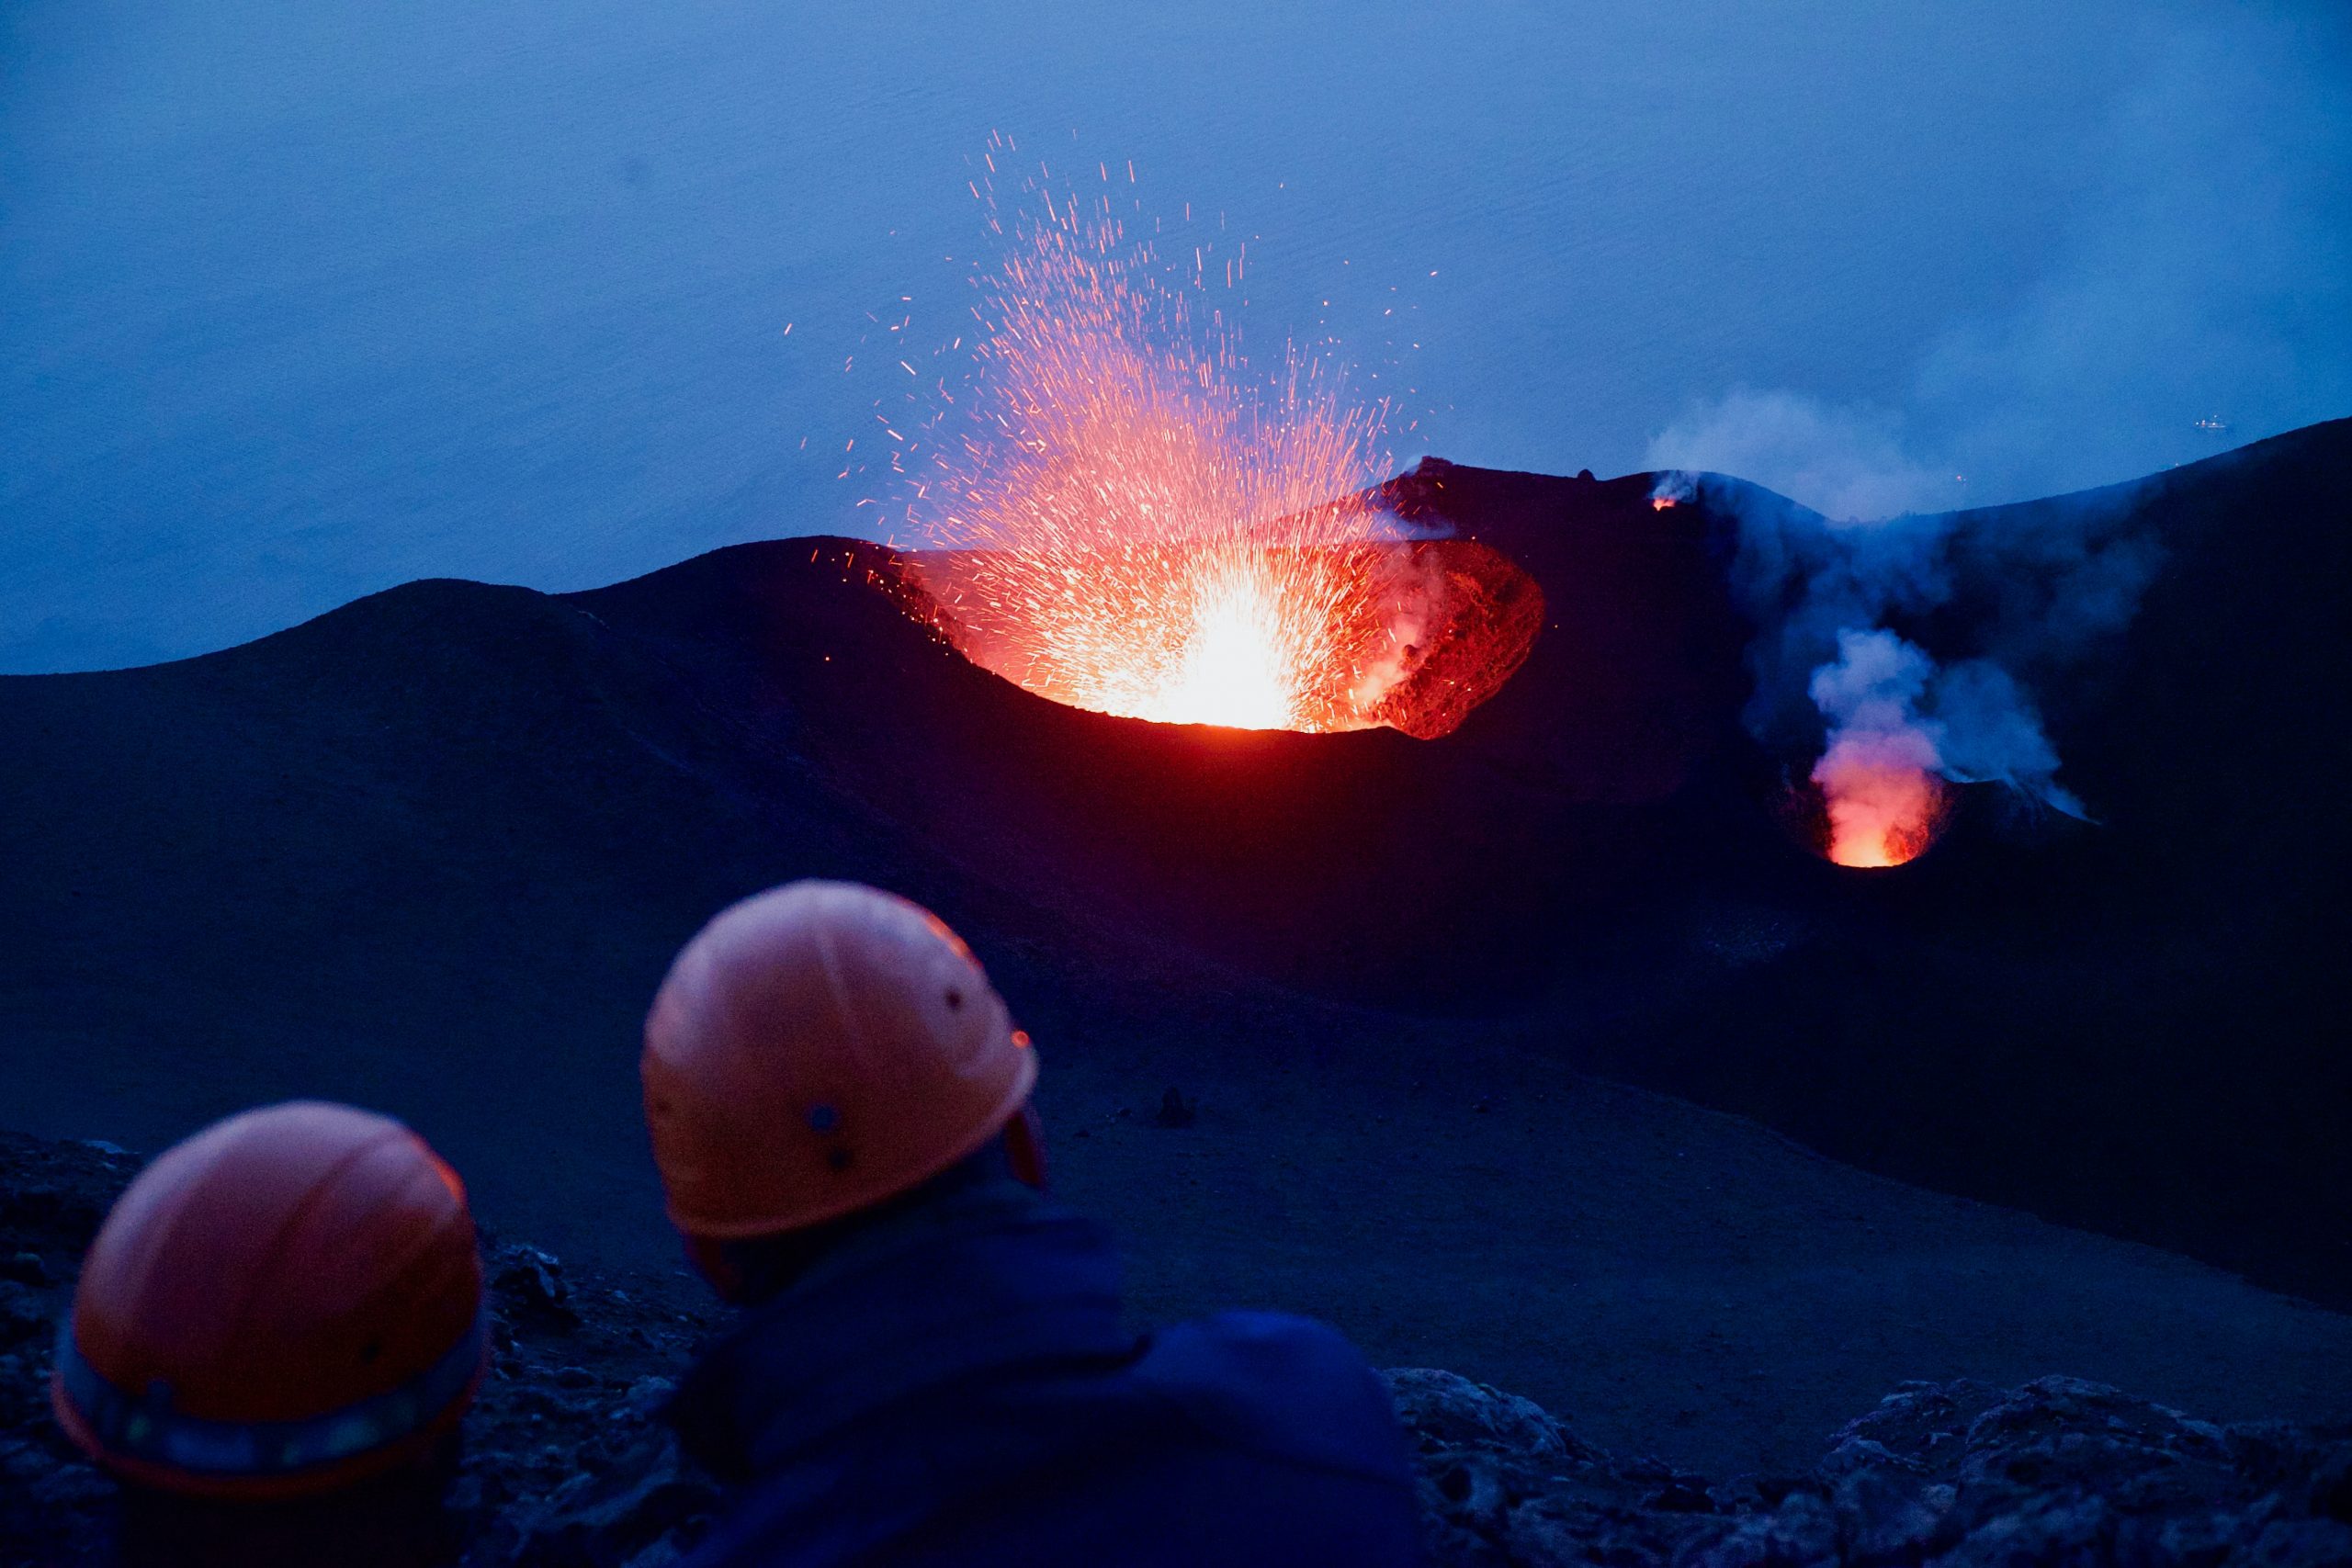 workers in hard hats looking at erupting volcano, symbolizing the increasing volatility in the fiscal landscape